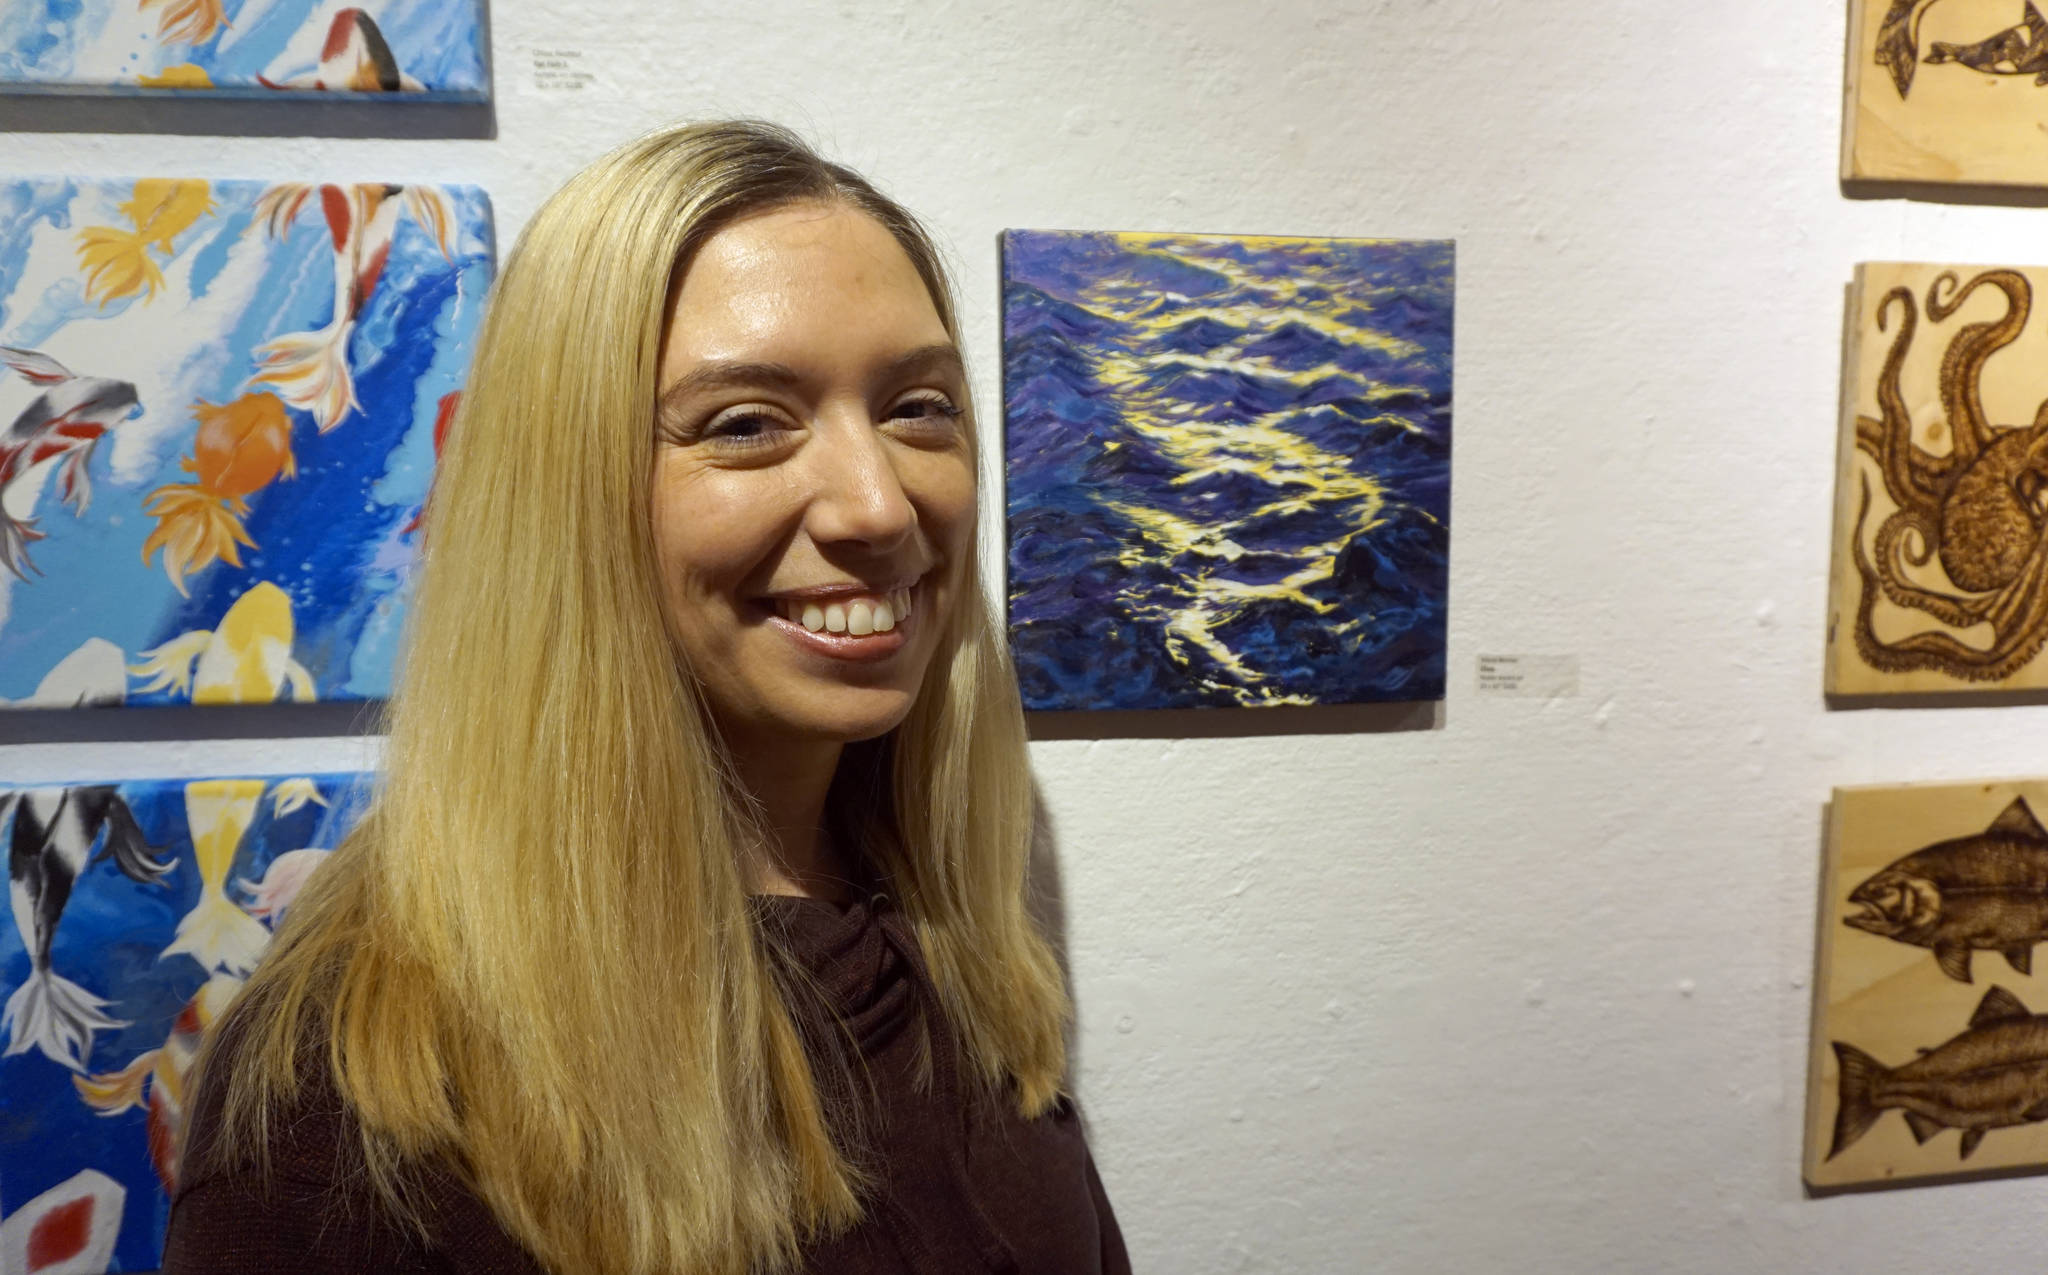 Maria Bernier stands by her painting, “Chop,” at the First Friday, Dec 7, 2018, opening of Bunnell Street Arts Center’s 10x10 show in Homer, Alaska. (Photo by Michael Armstrong/Homer News)